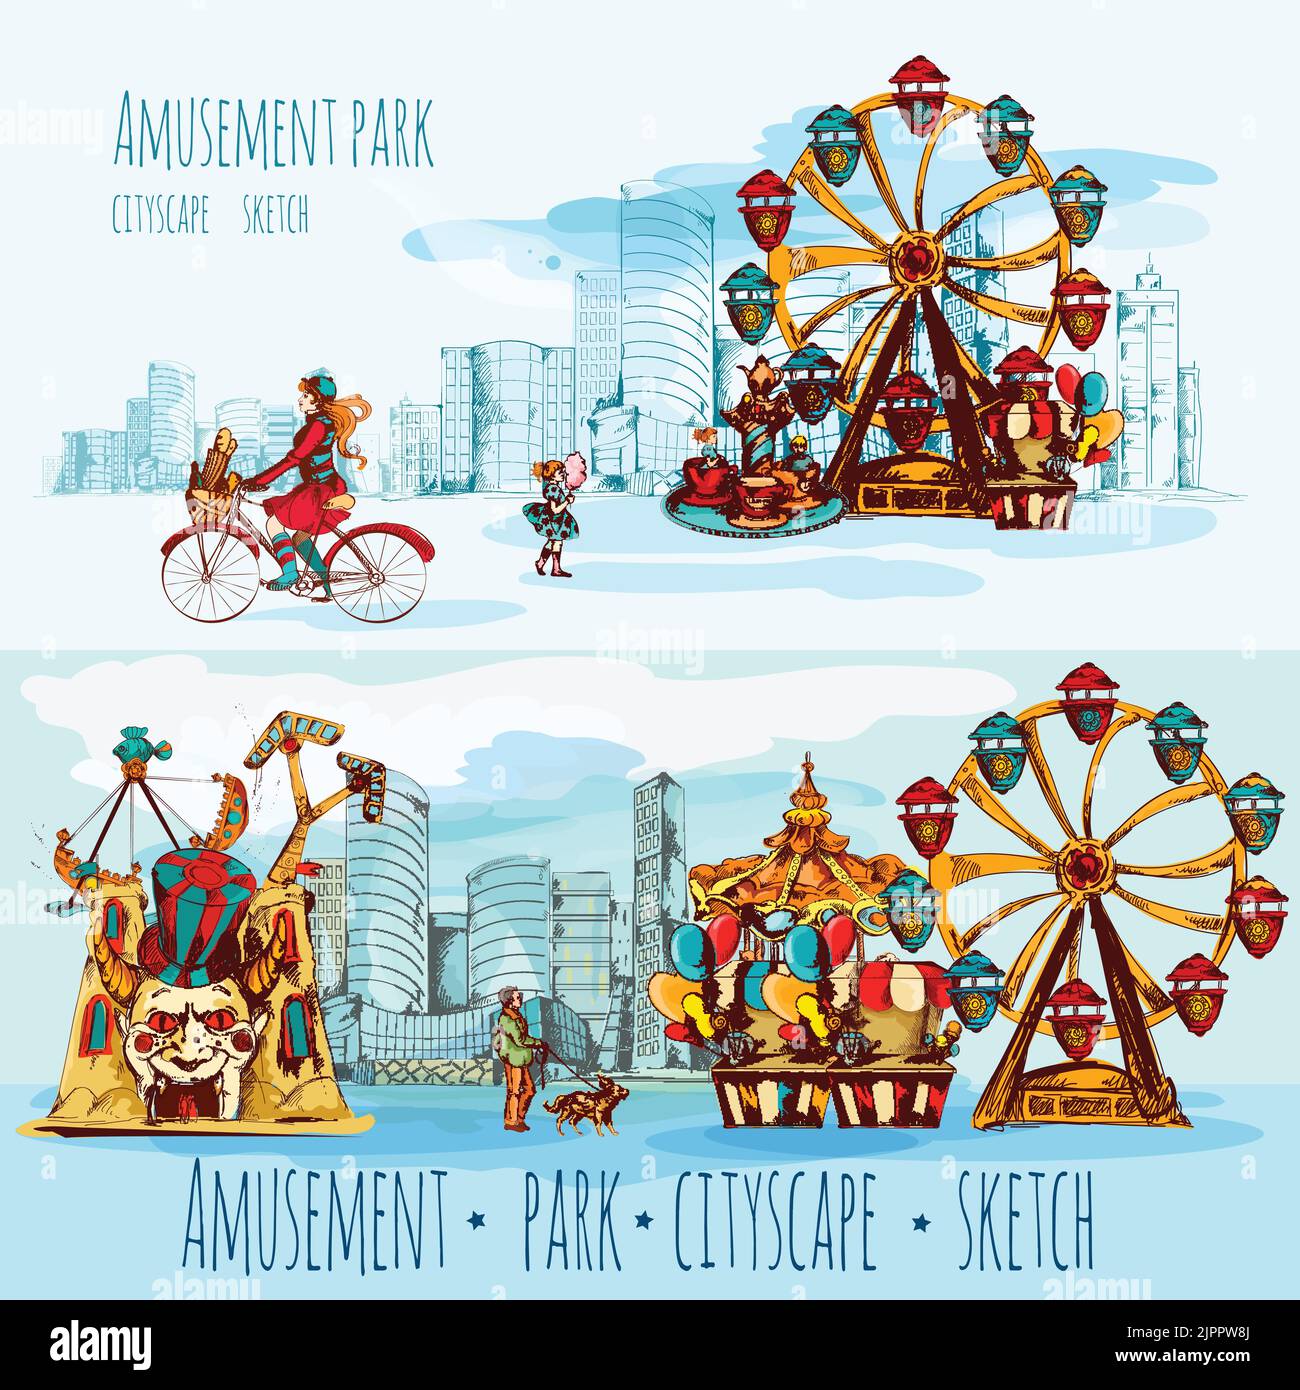 Amusement park sketch cityscape horizontal banners with people ferris wheel and city on background vector illustration Stock Vector